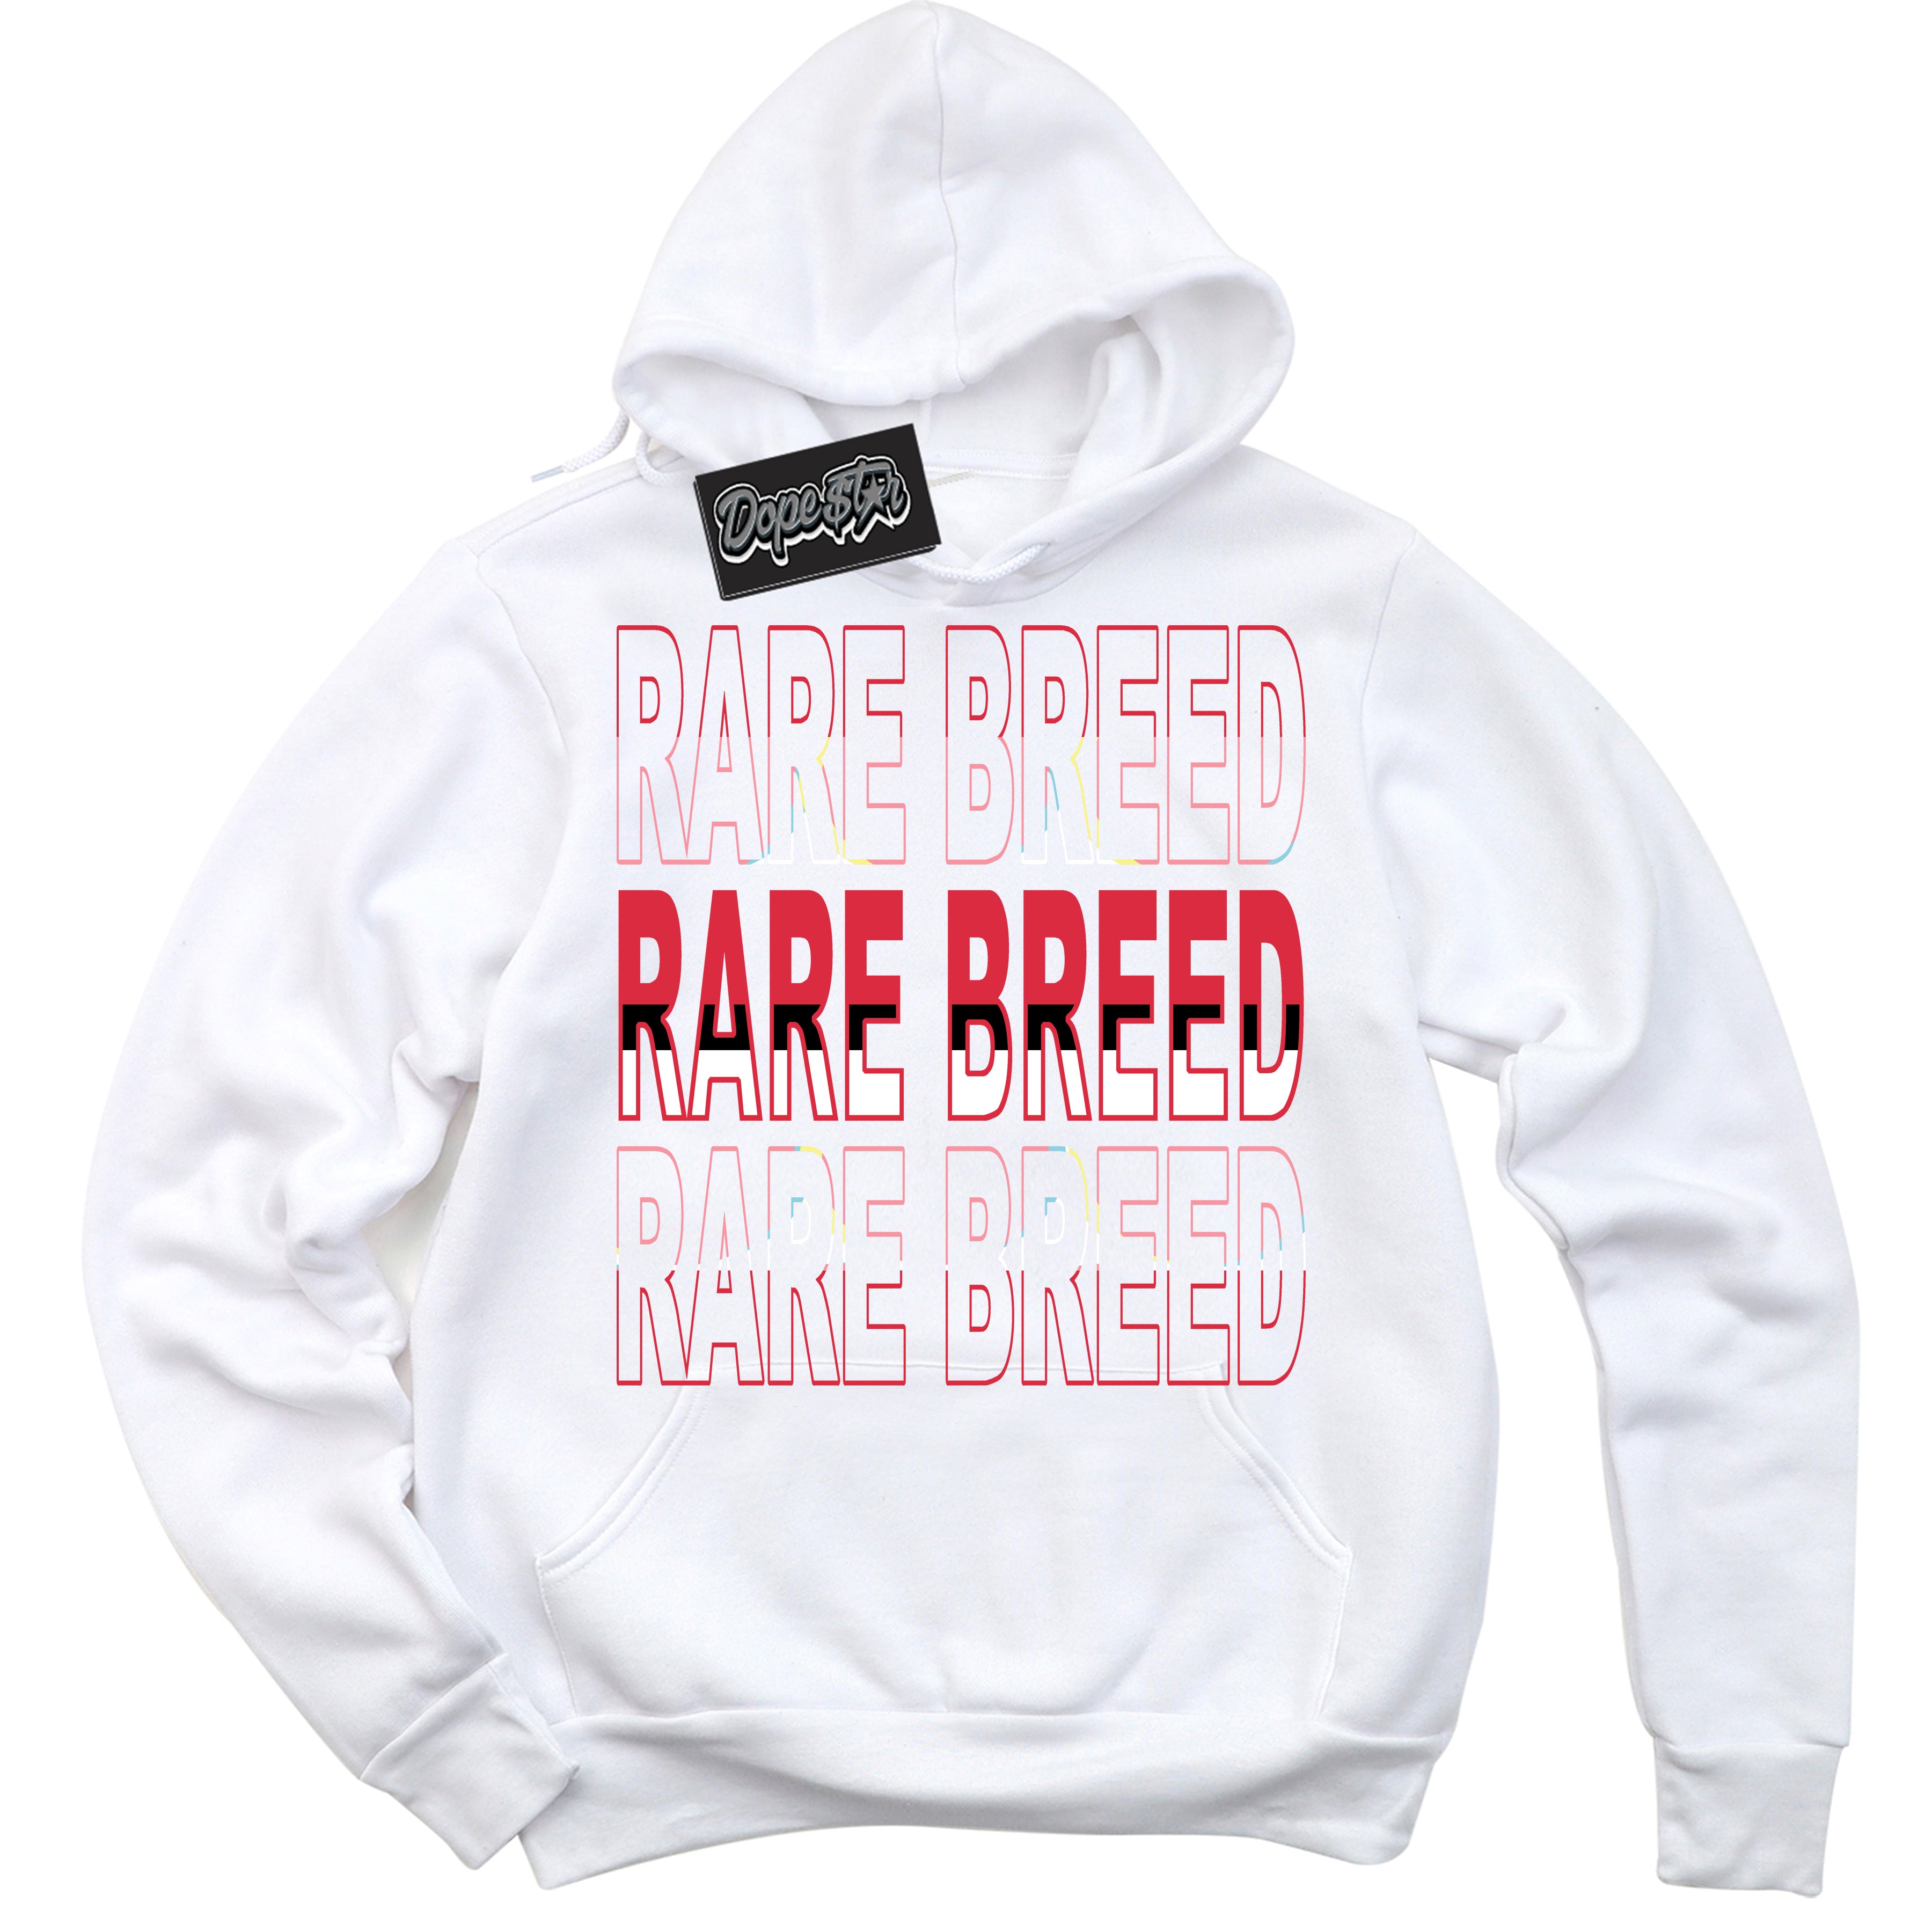 Cool White Graphic DopeStar Hoodie with “ Rare Breed “ print, that perfectly matches Spider-Verse 1s sneakers